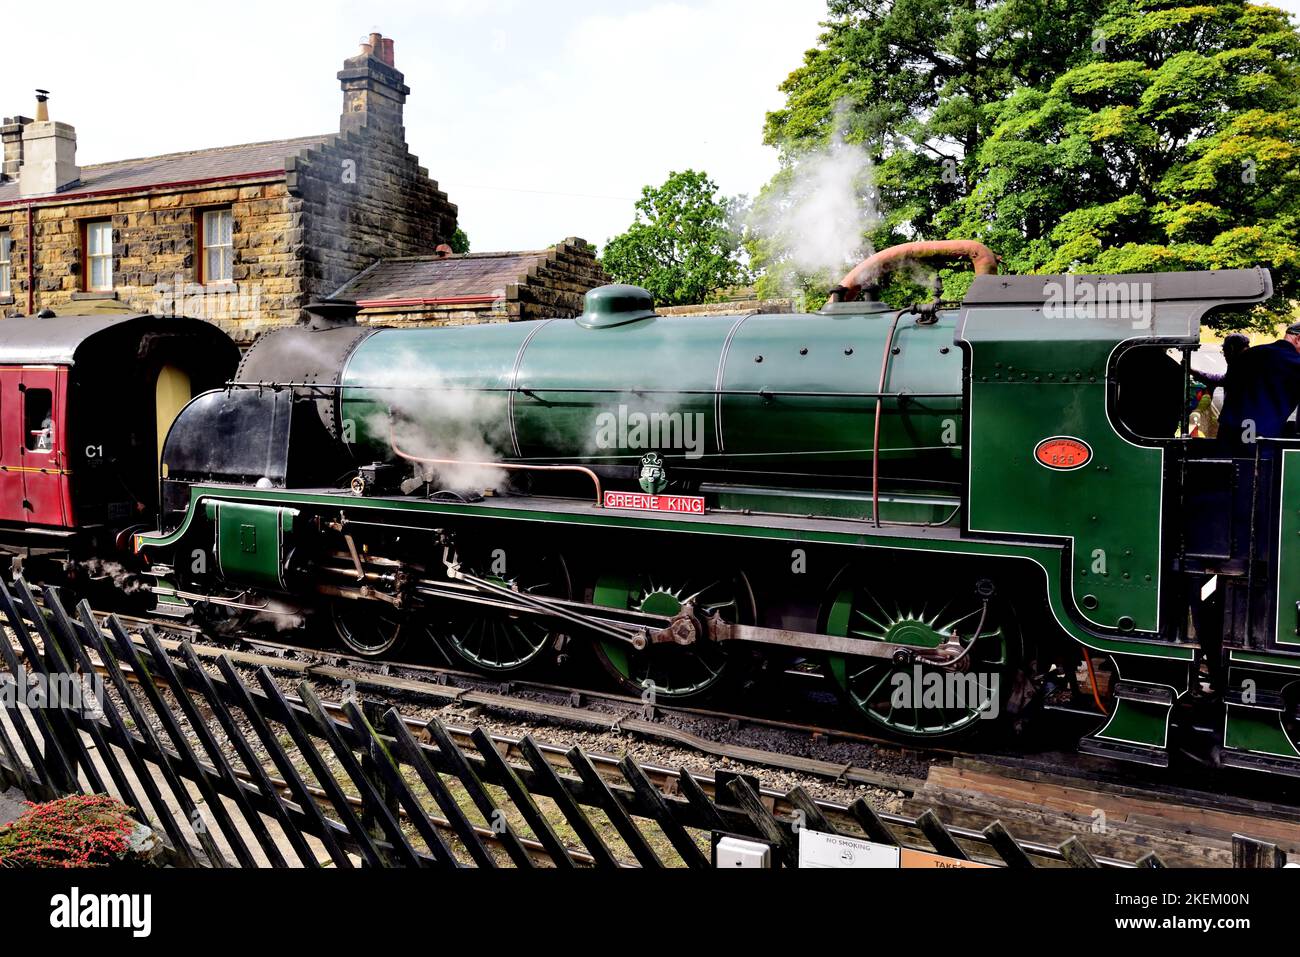 Southern Railway class S15 locomotive No 825 at Goathland, North Yorkshire Moors Railway, carrying the Greene King nameplate, 22.09.2022. Stock Photo